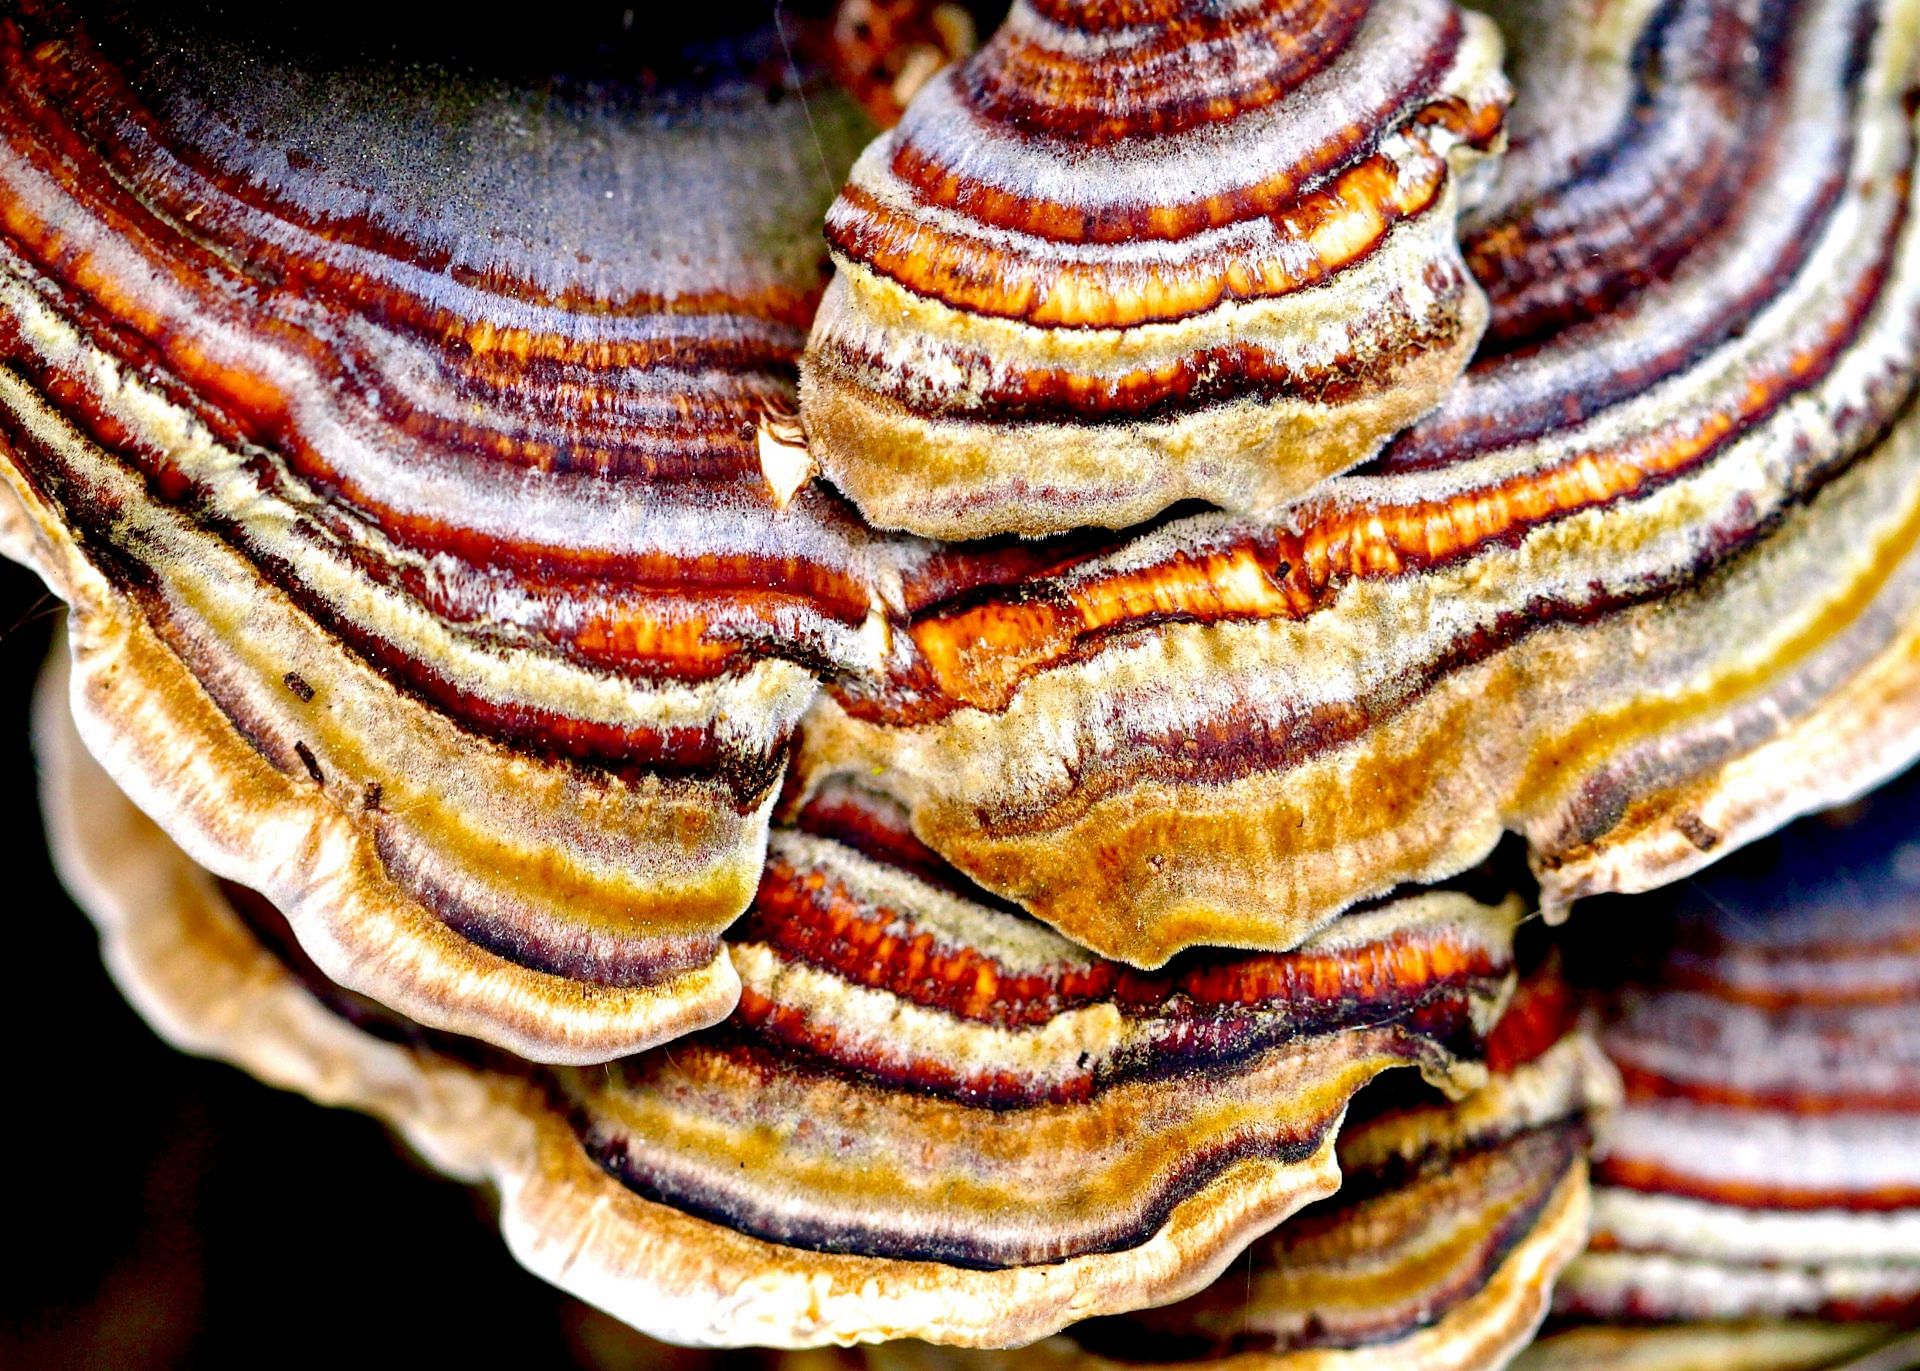 Reishi mushrooms helps in reducing depression and boosts your heart health. (Image via Unsplash / James Wainscoat)